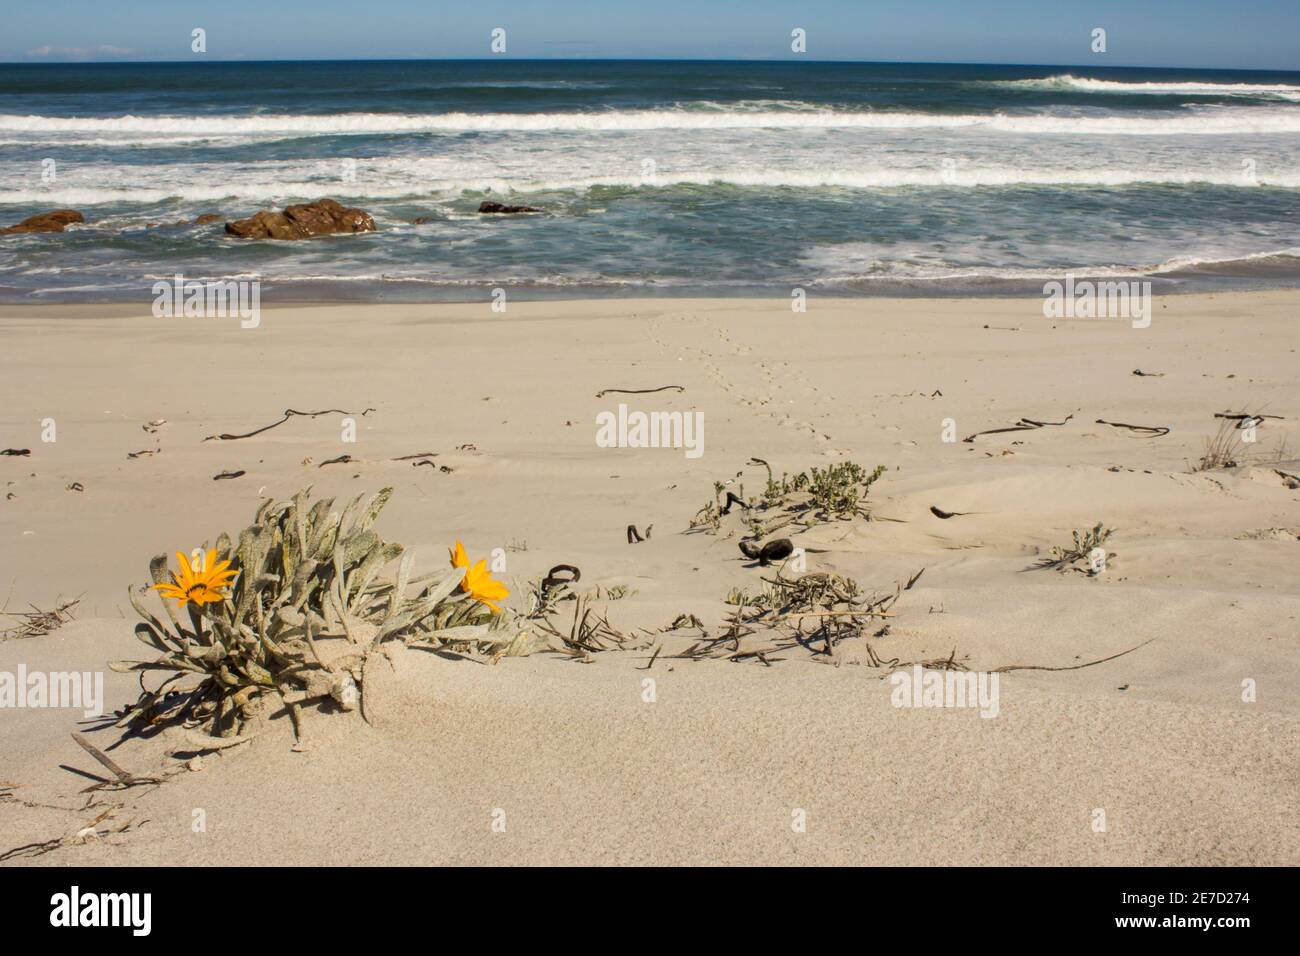 Gazania Splendidissima, an endemic semi succulent which have no common name, in bloom on a sandy section of beach, in the Namaqua National Park, RSA Stock Photo